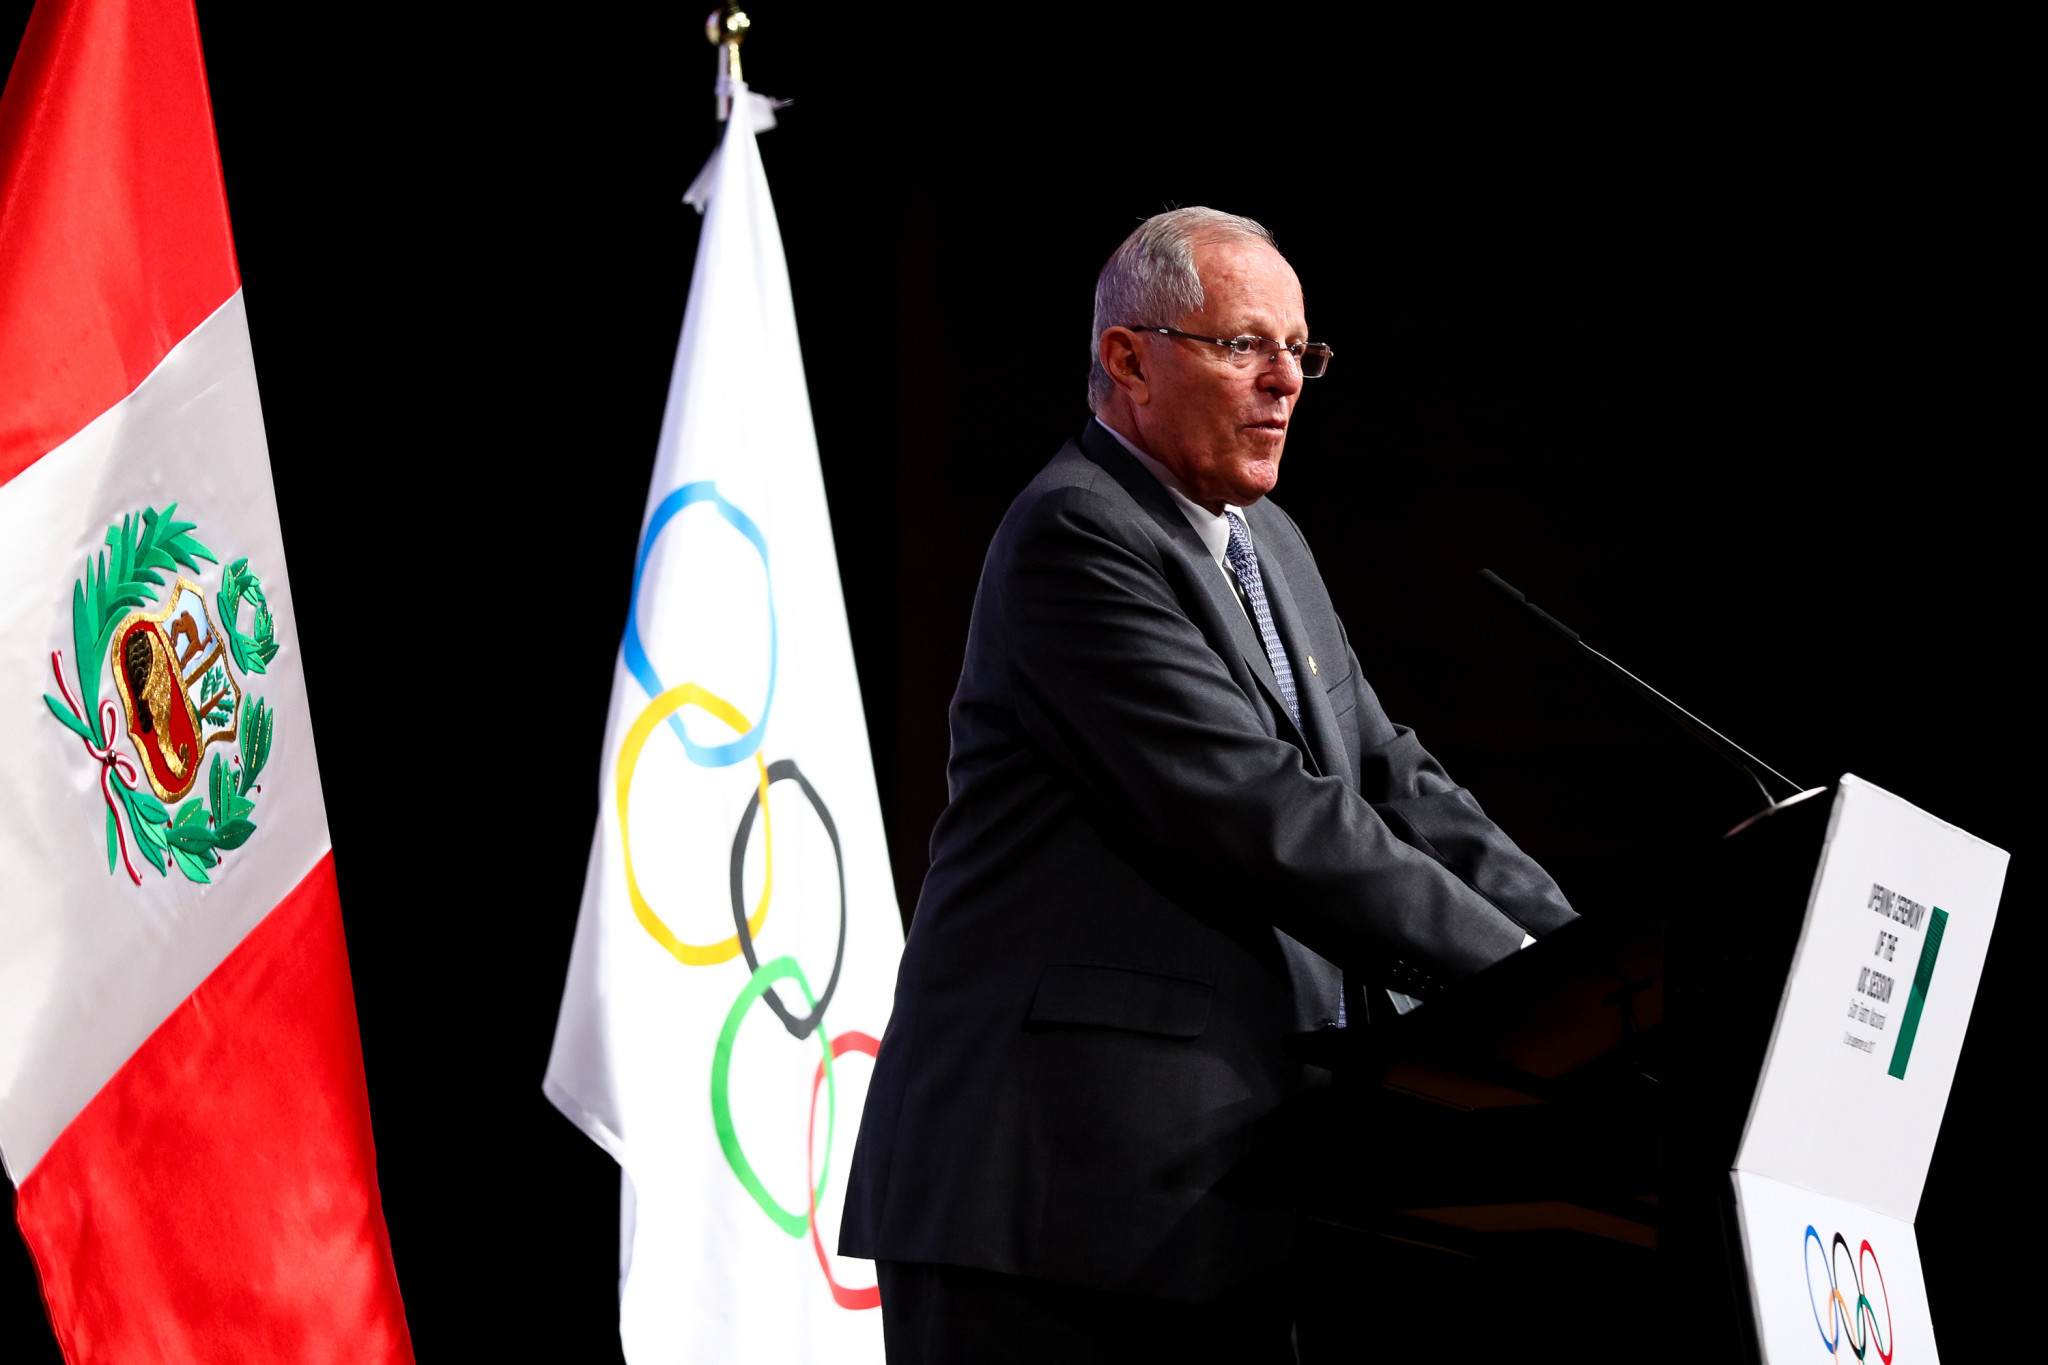 Peru President Pedro Pablo Kuczynski delivered the opening speech of the Ceremony ©Getty Images